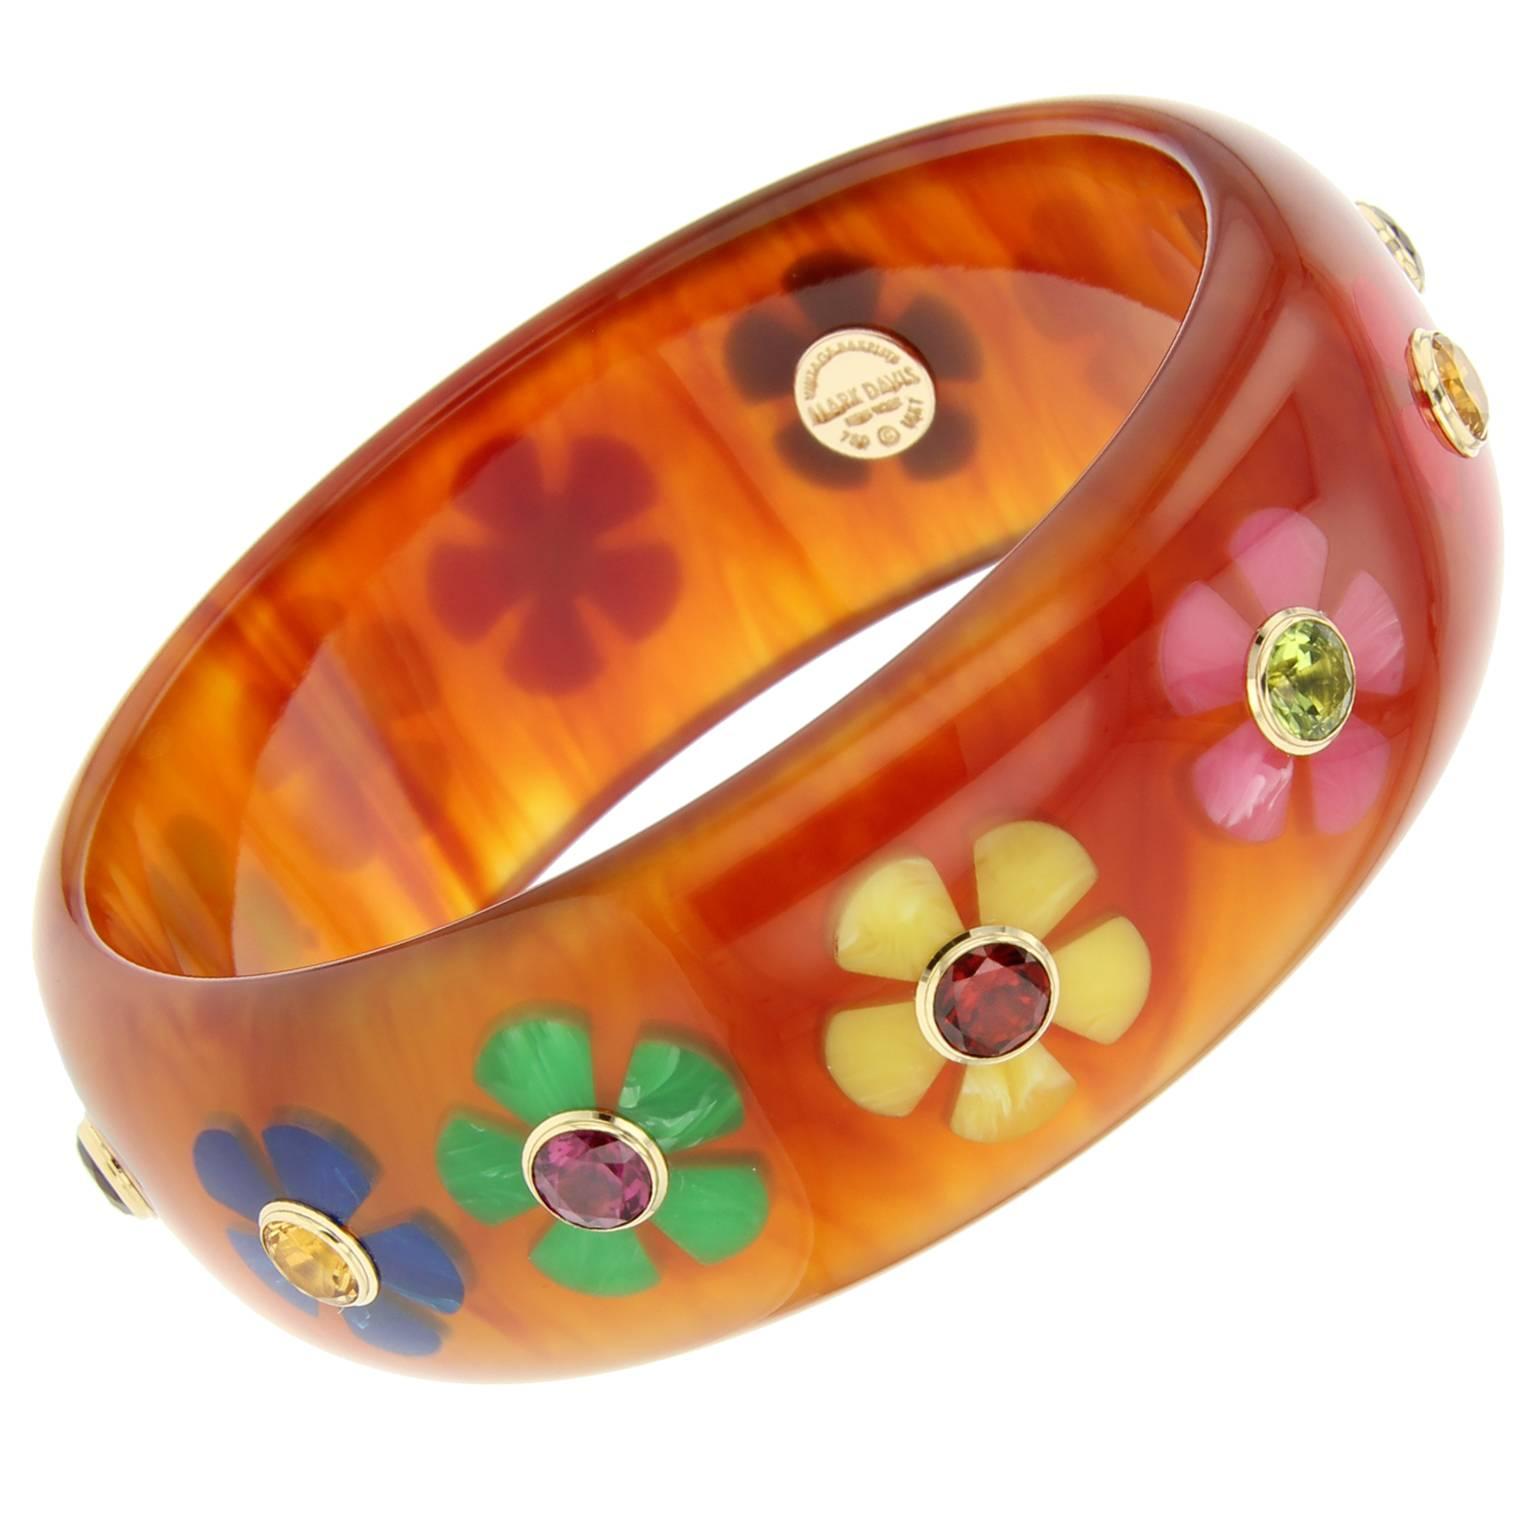 This Mark Davis bangle was handcrafted of tortoise vintage bakelite and finely inlaid with multi colored bakelite flowers.  At the center of each flower is a large citrine, garnet, or peridot bezel-set in 18k yellow gold. 

Full details below: 
•